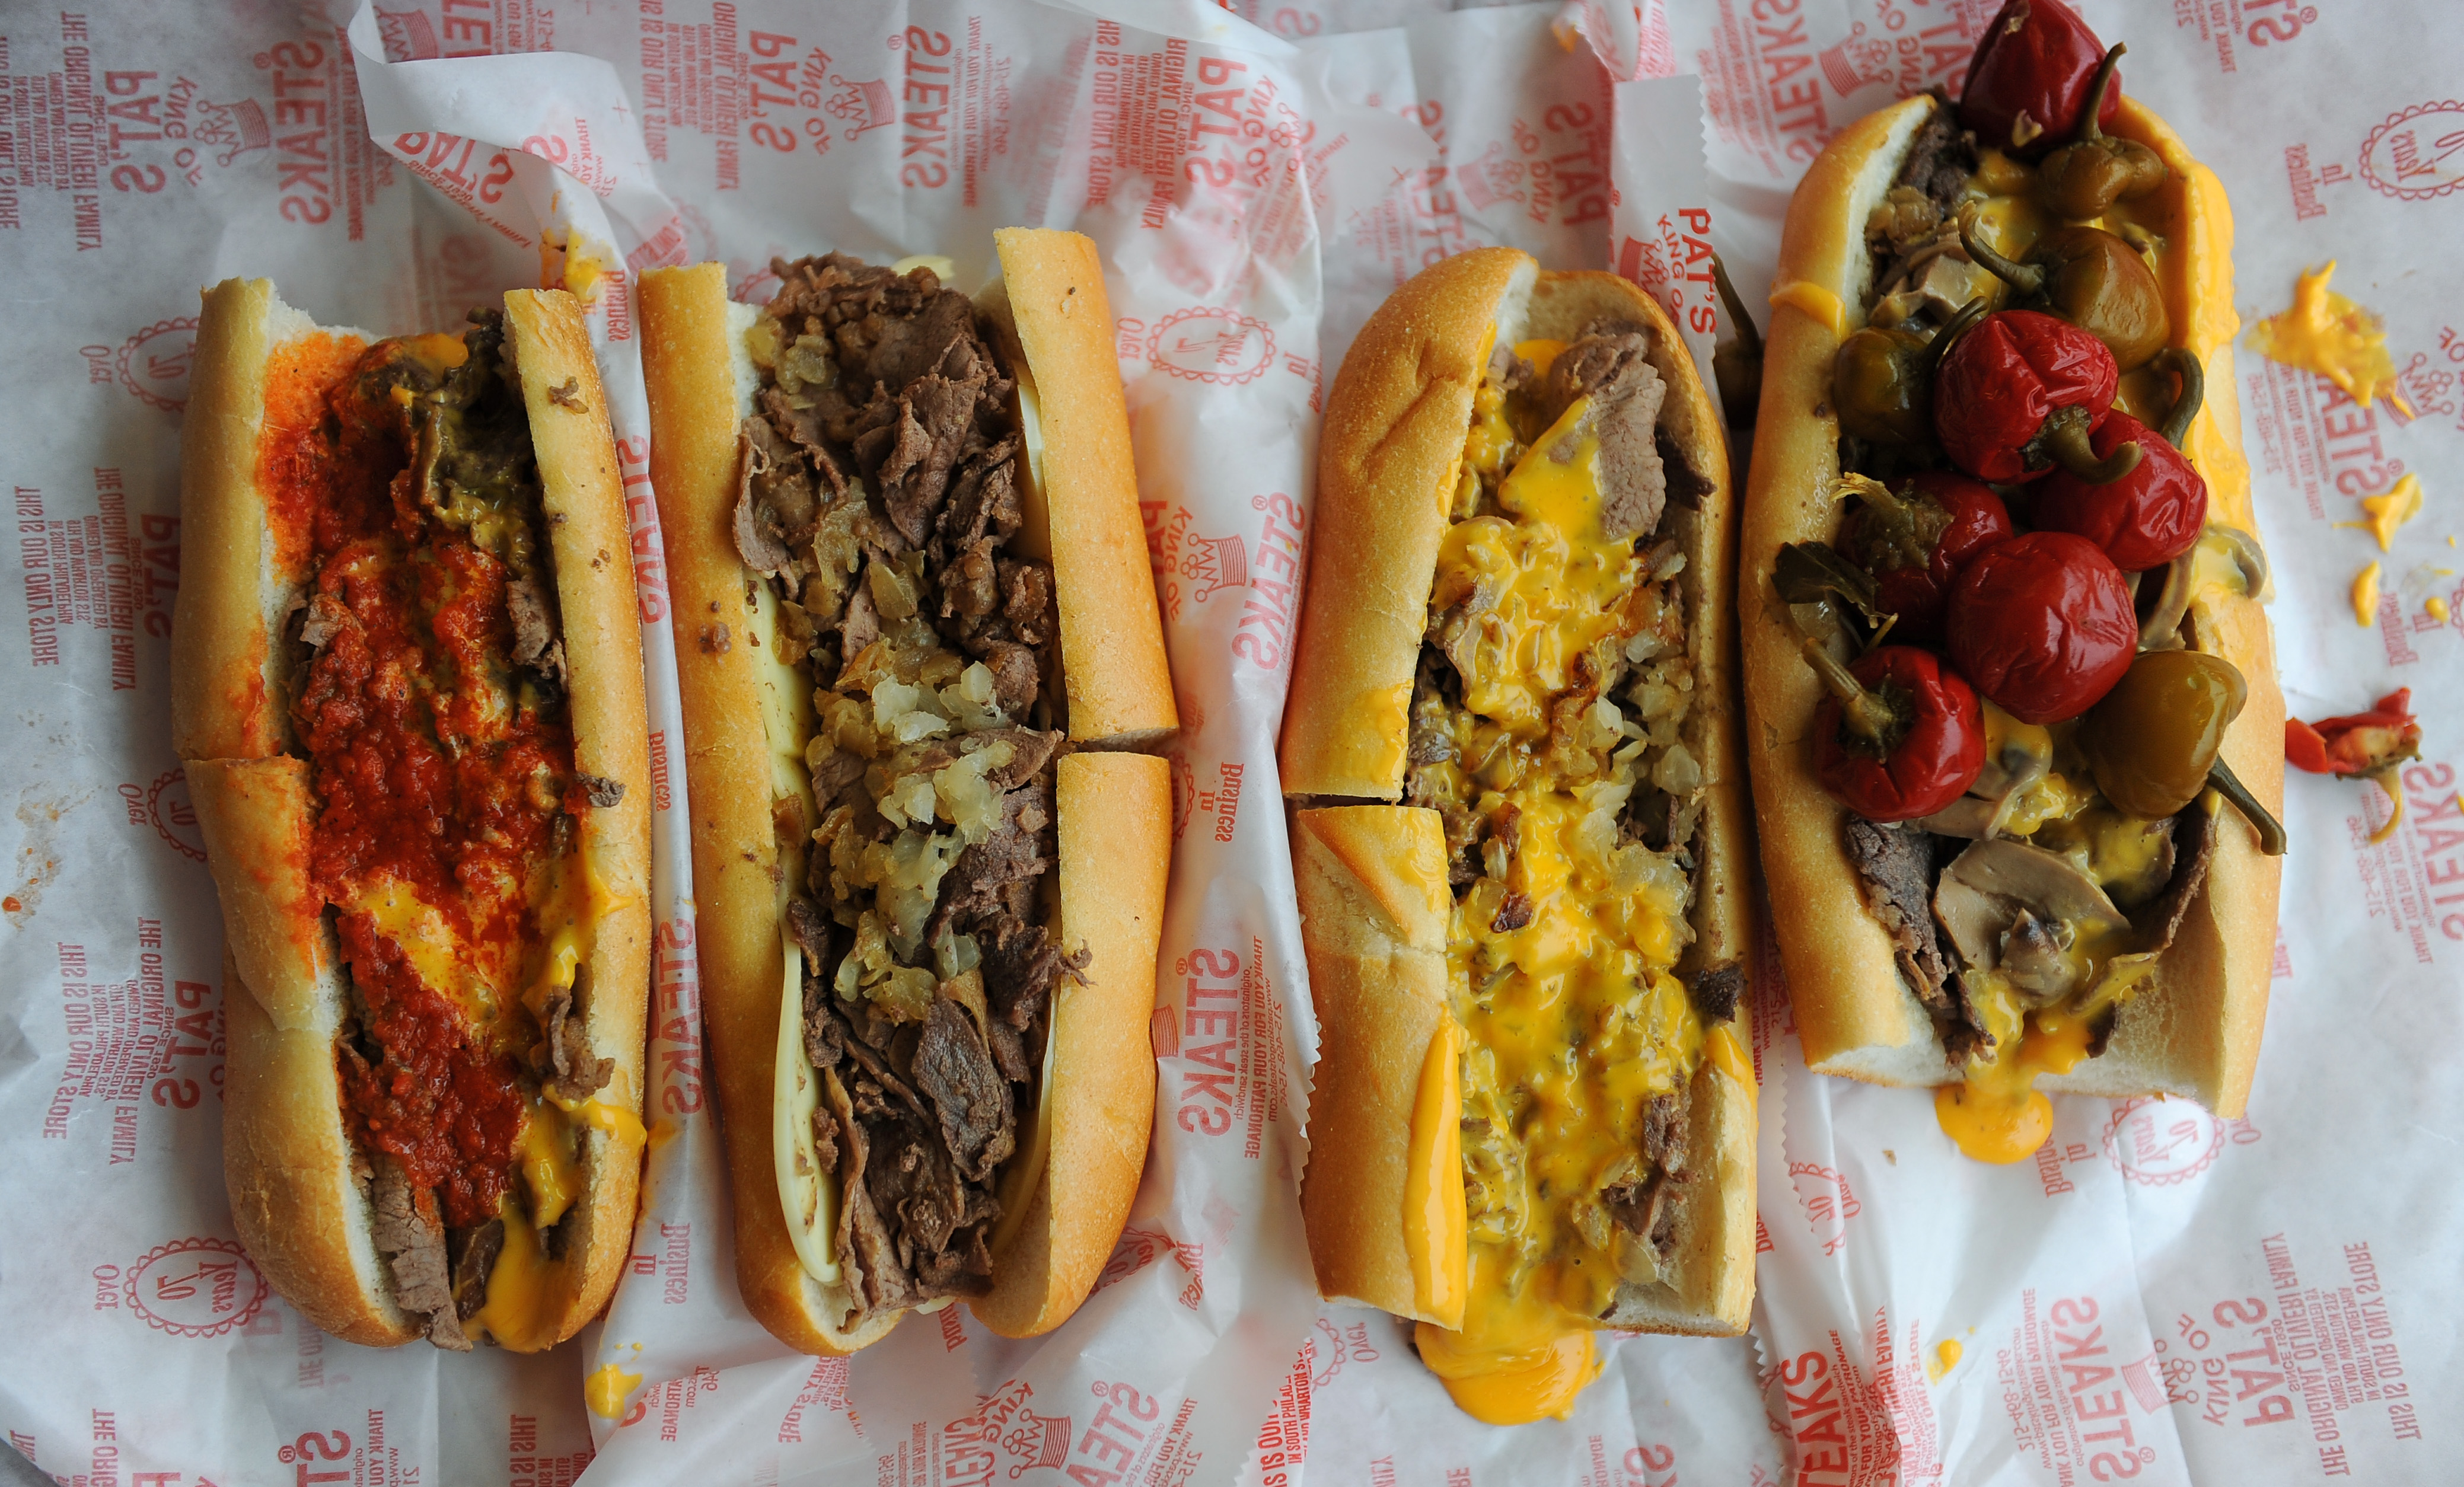 An overhead image of four cheesesteaks on white paper with red writing, one with peppers, one plain, one with Cheez Whiz, and one with marinara sauce.